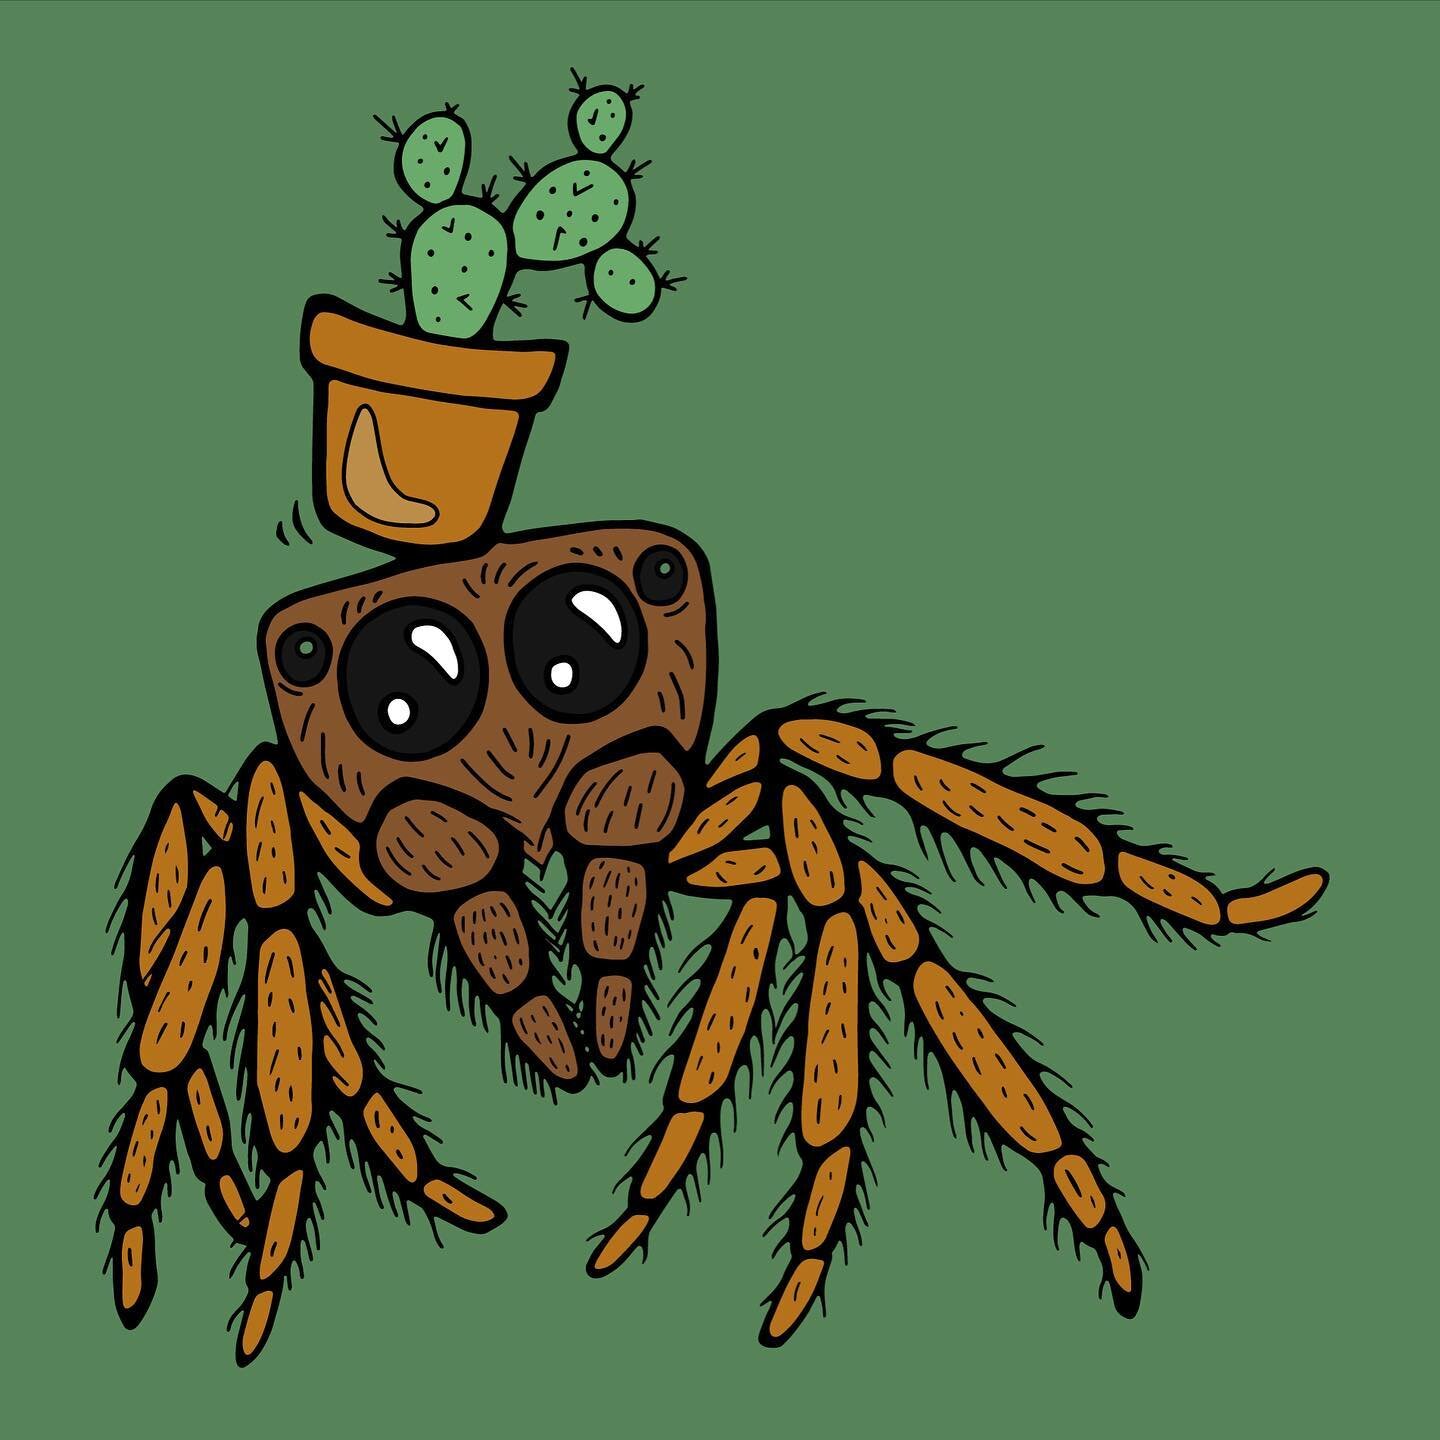 ✨New design up! ✨ this little jumping spider and her prickly pear cactus are here to say hello! Get both of their spiky selves in our shop, link in bio! 🌵 #jumpingspider #araneae #spider #cute #cactus #pricklypear #design #digitalart #digitaldesign 